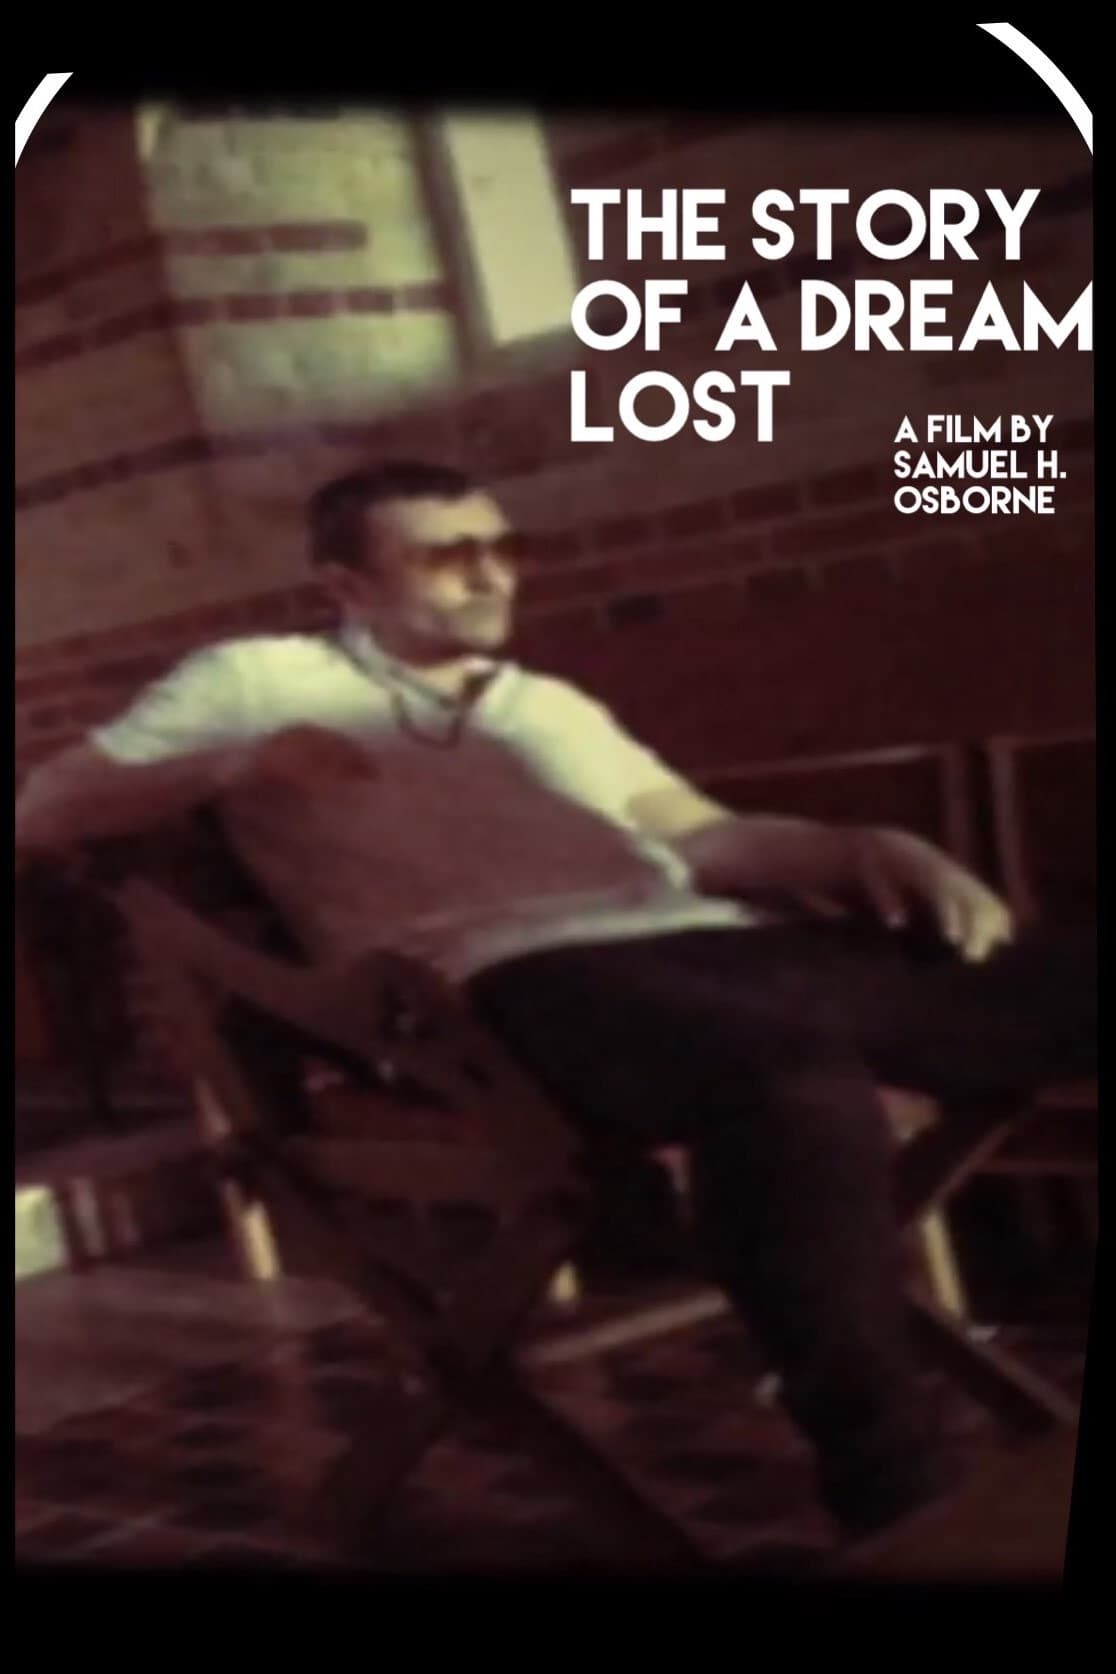 The Story of A Dream Lost